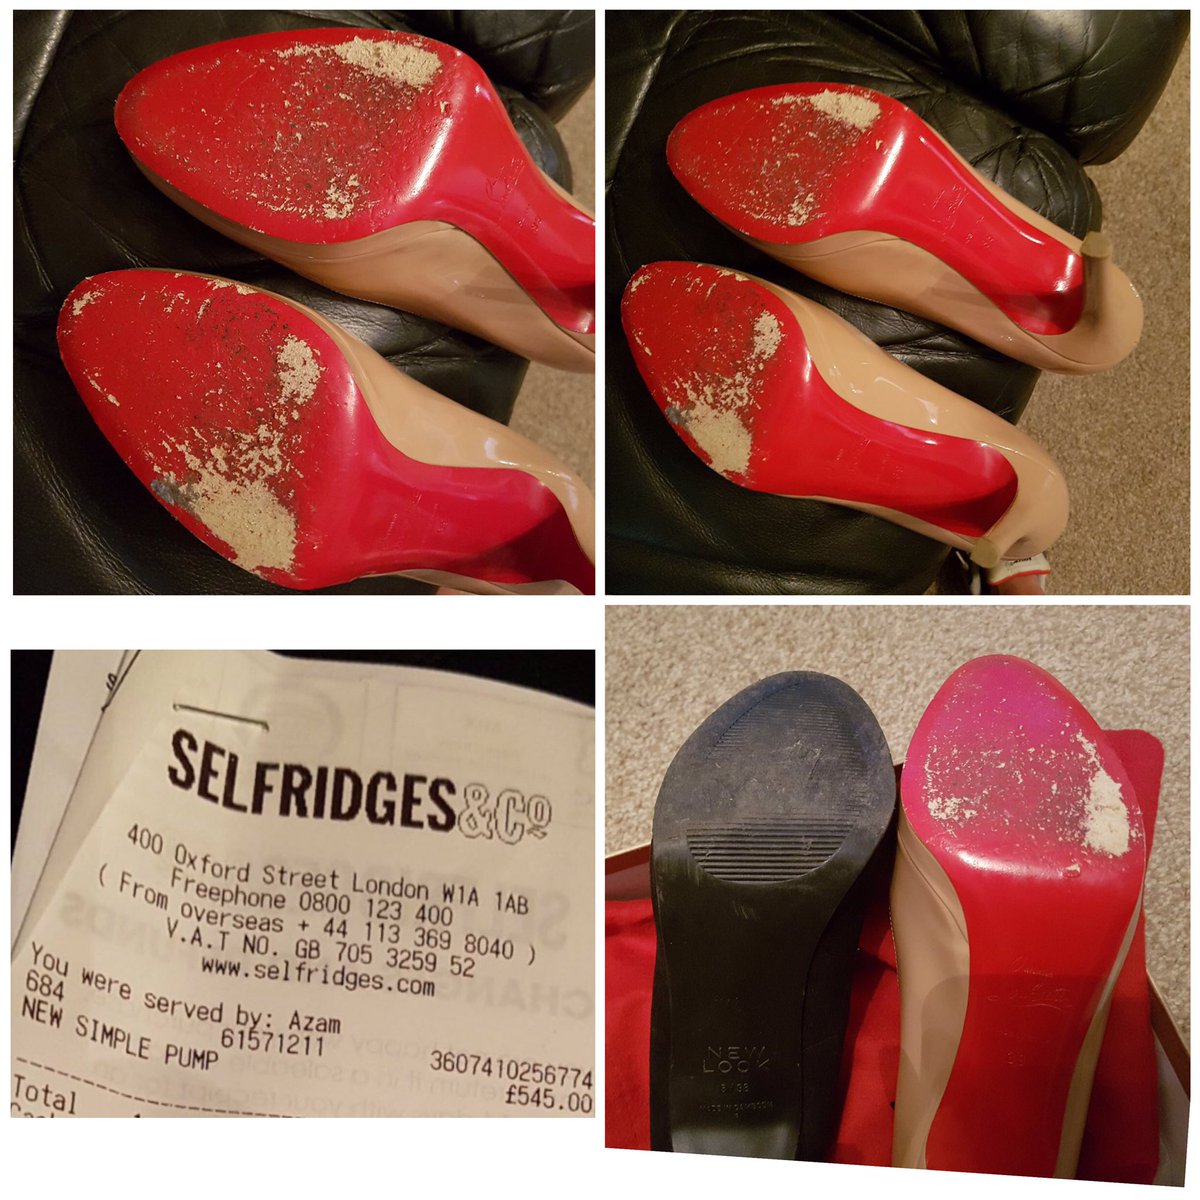 mammal Sport Paradoks Christian Louboutin a Twitter: "@Shy_ShannonOx @Selfridges Bonjour. Please  contact customerservice@uk.christianlouboutin.com for assistance with your  red soles!" / Twitter